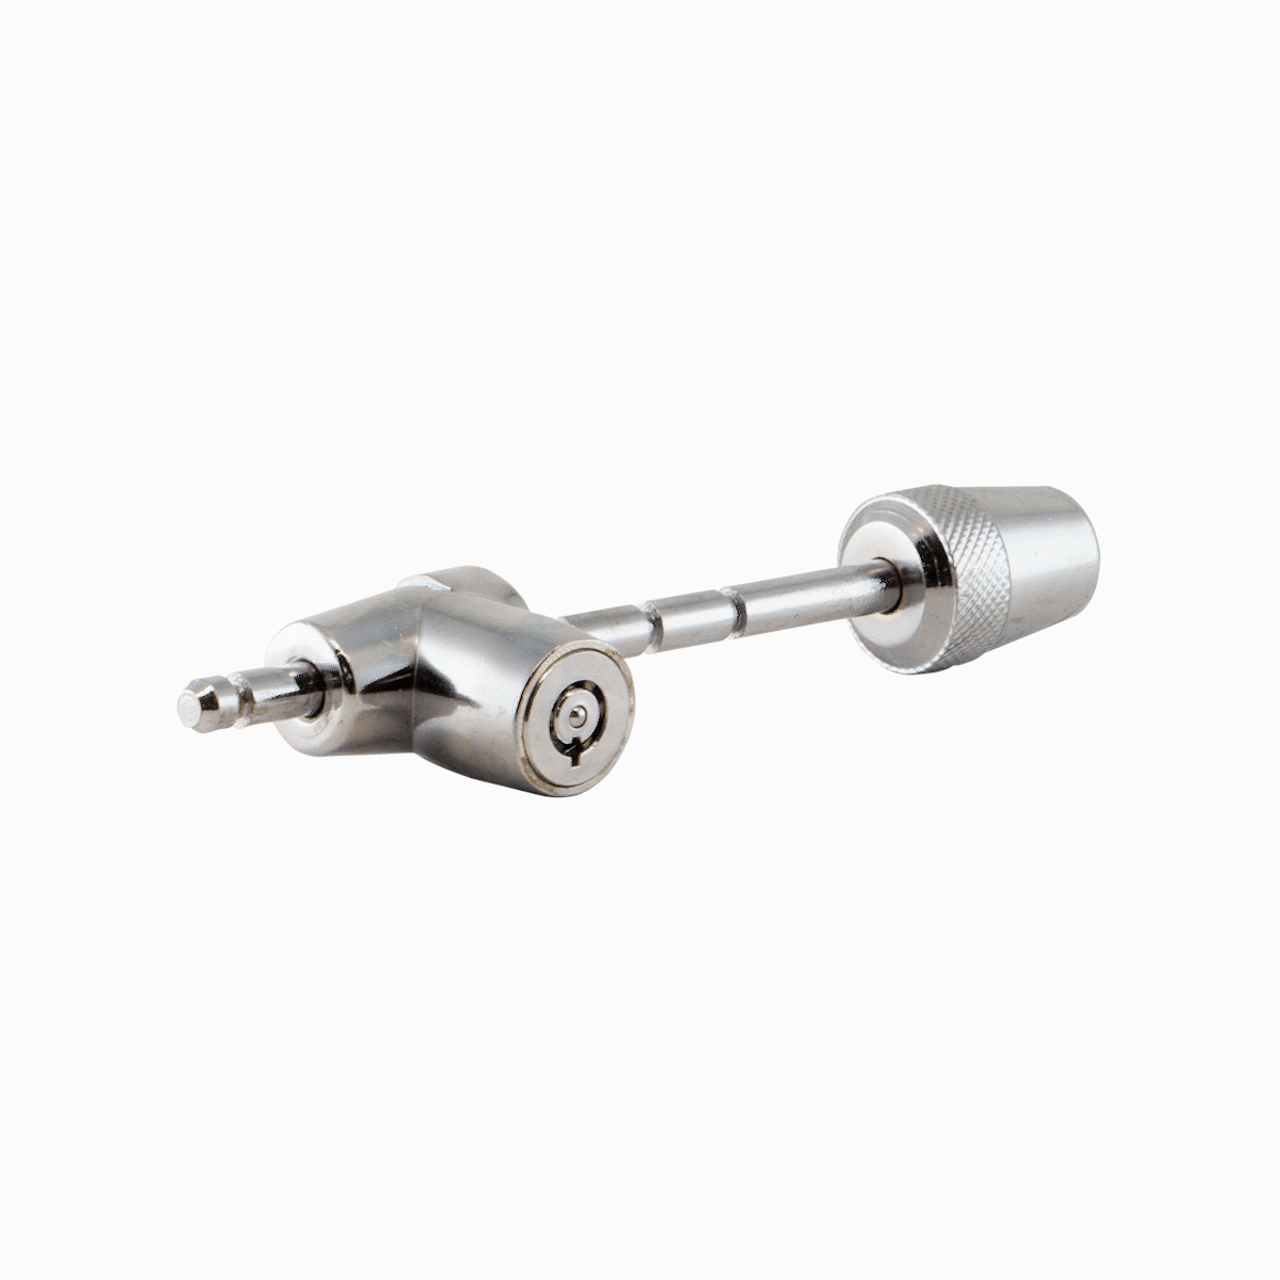 TMCLL --- Trimax™ Coupler Lever Lock